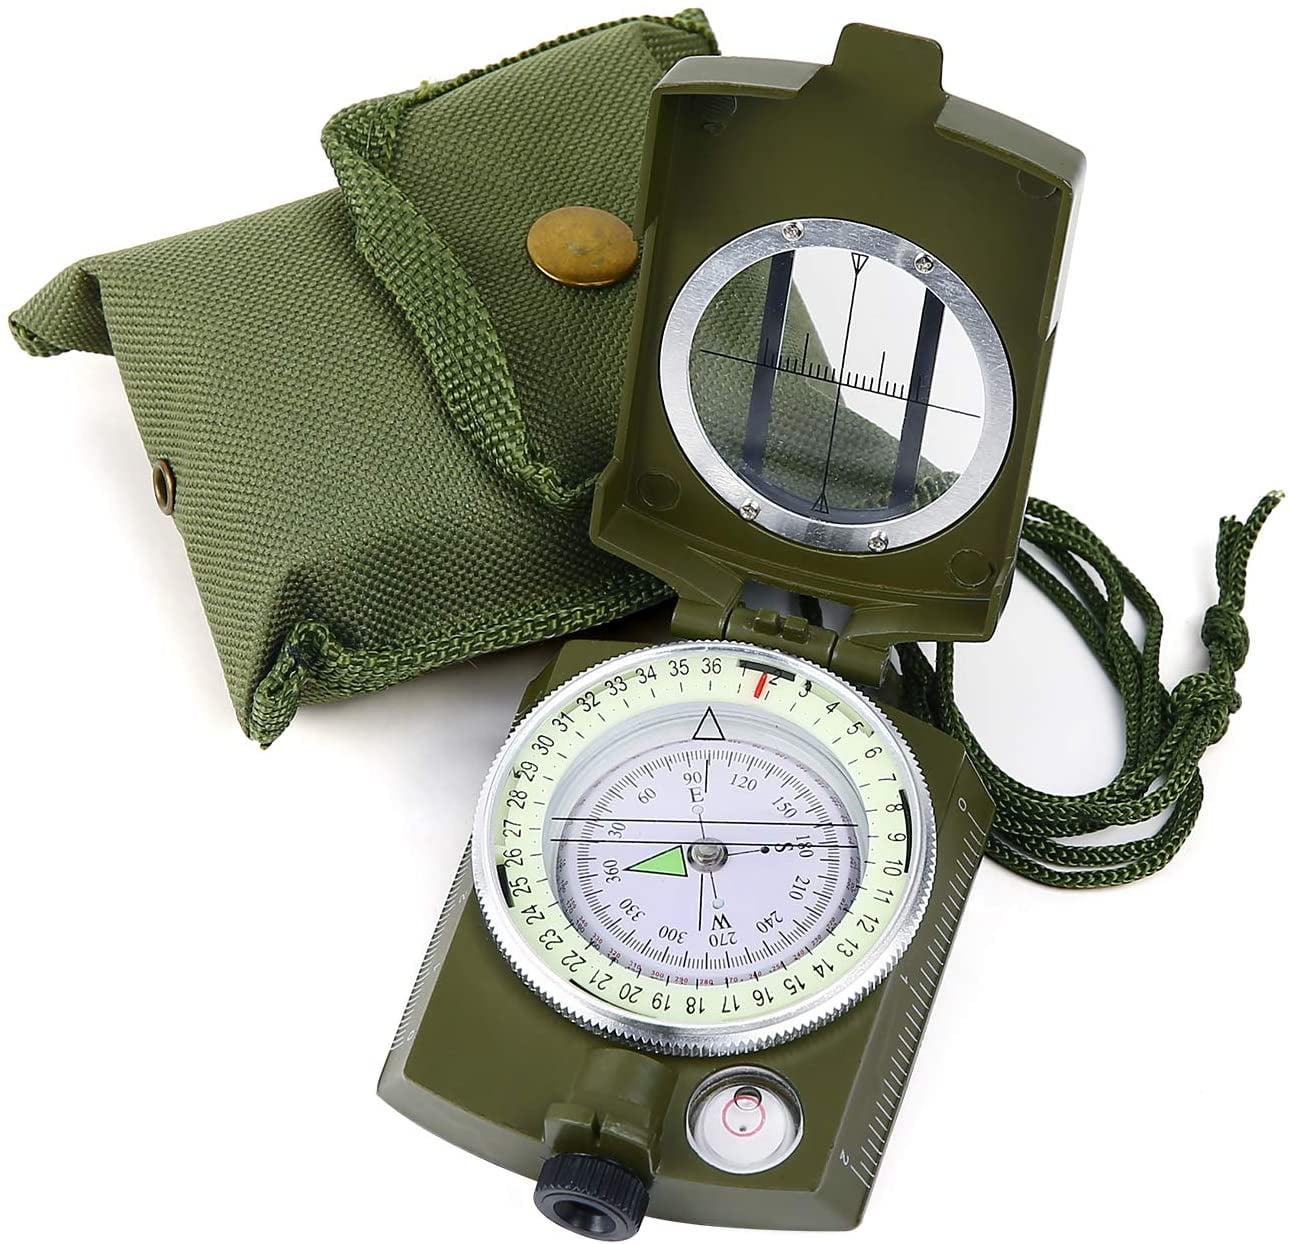 Compass Lensatic Military Lens OutdoorSurvival Army Mini Camping Hiking Pocket 